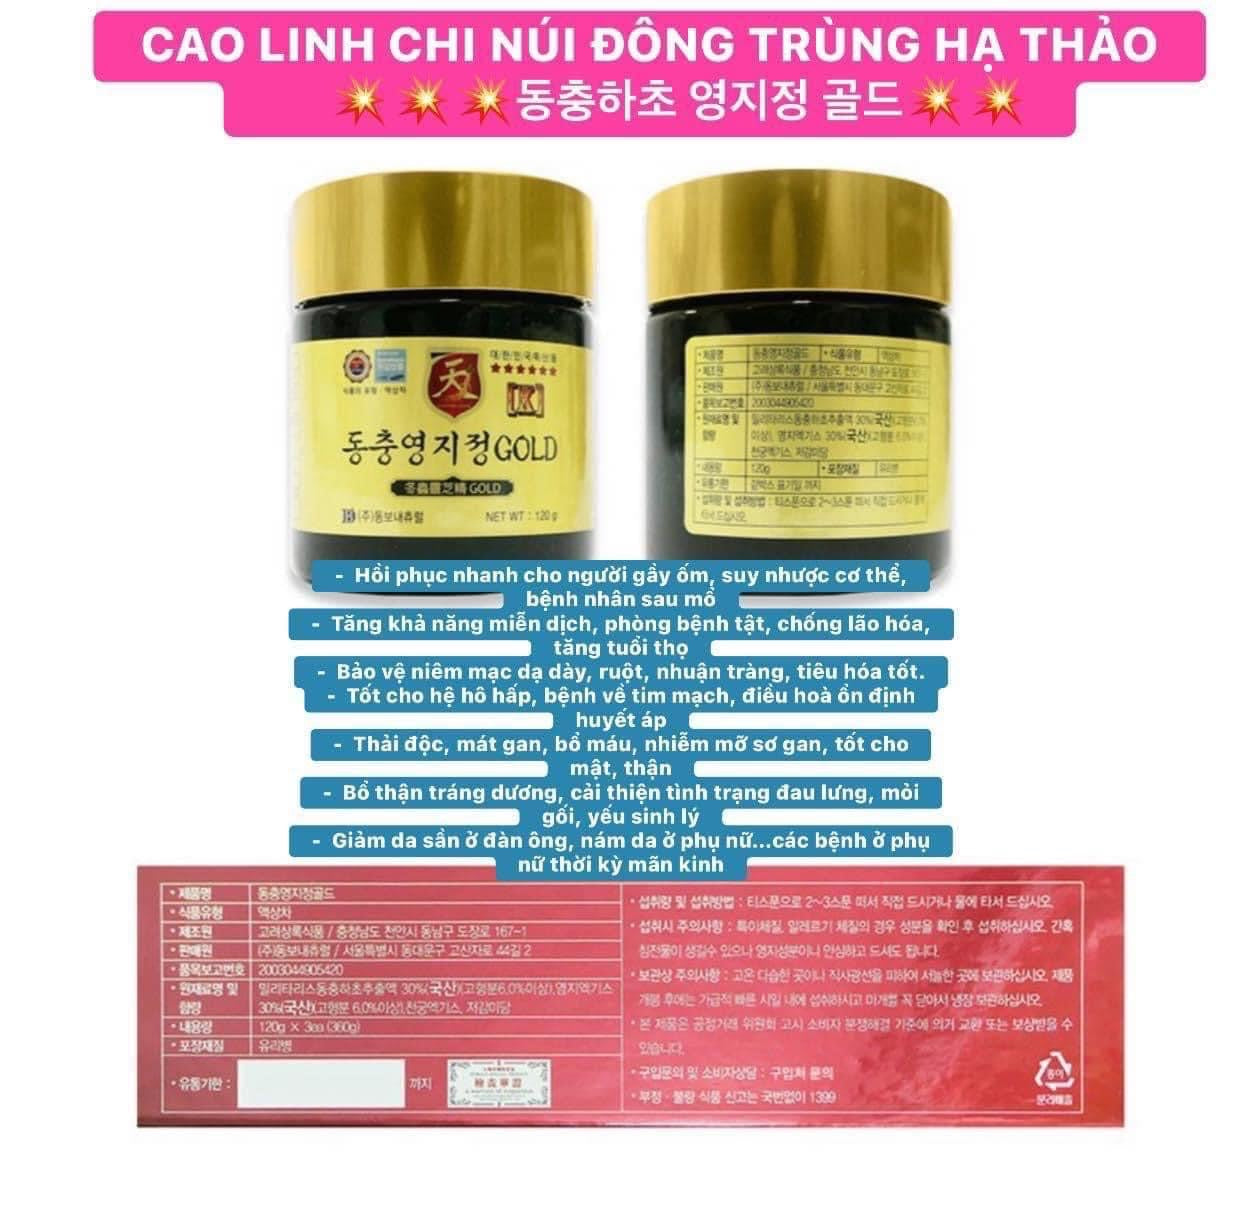 Cao linh chi nui dong trung ha thao